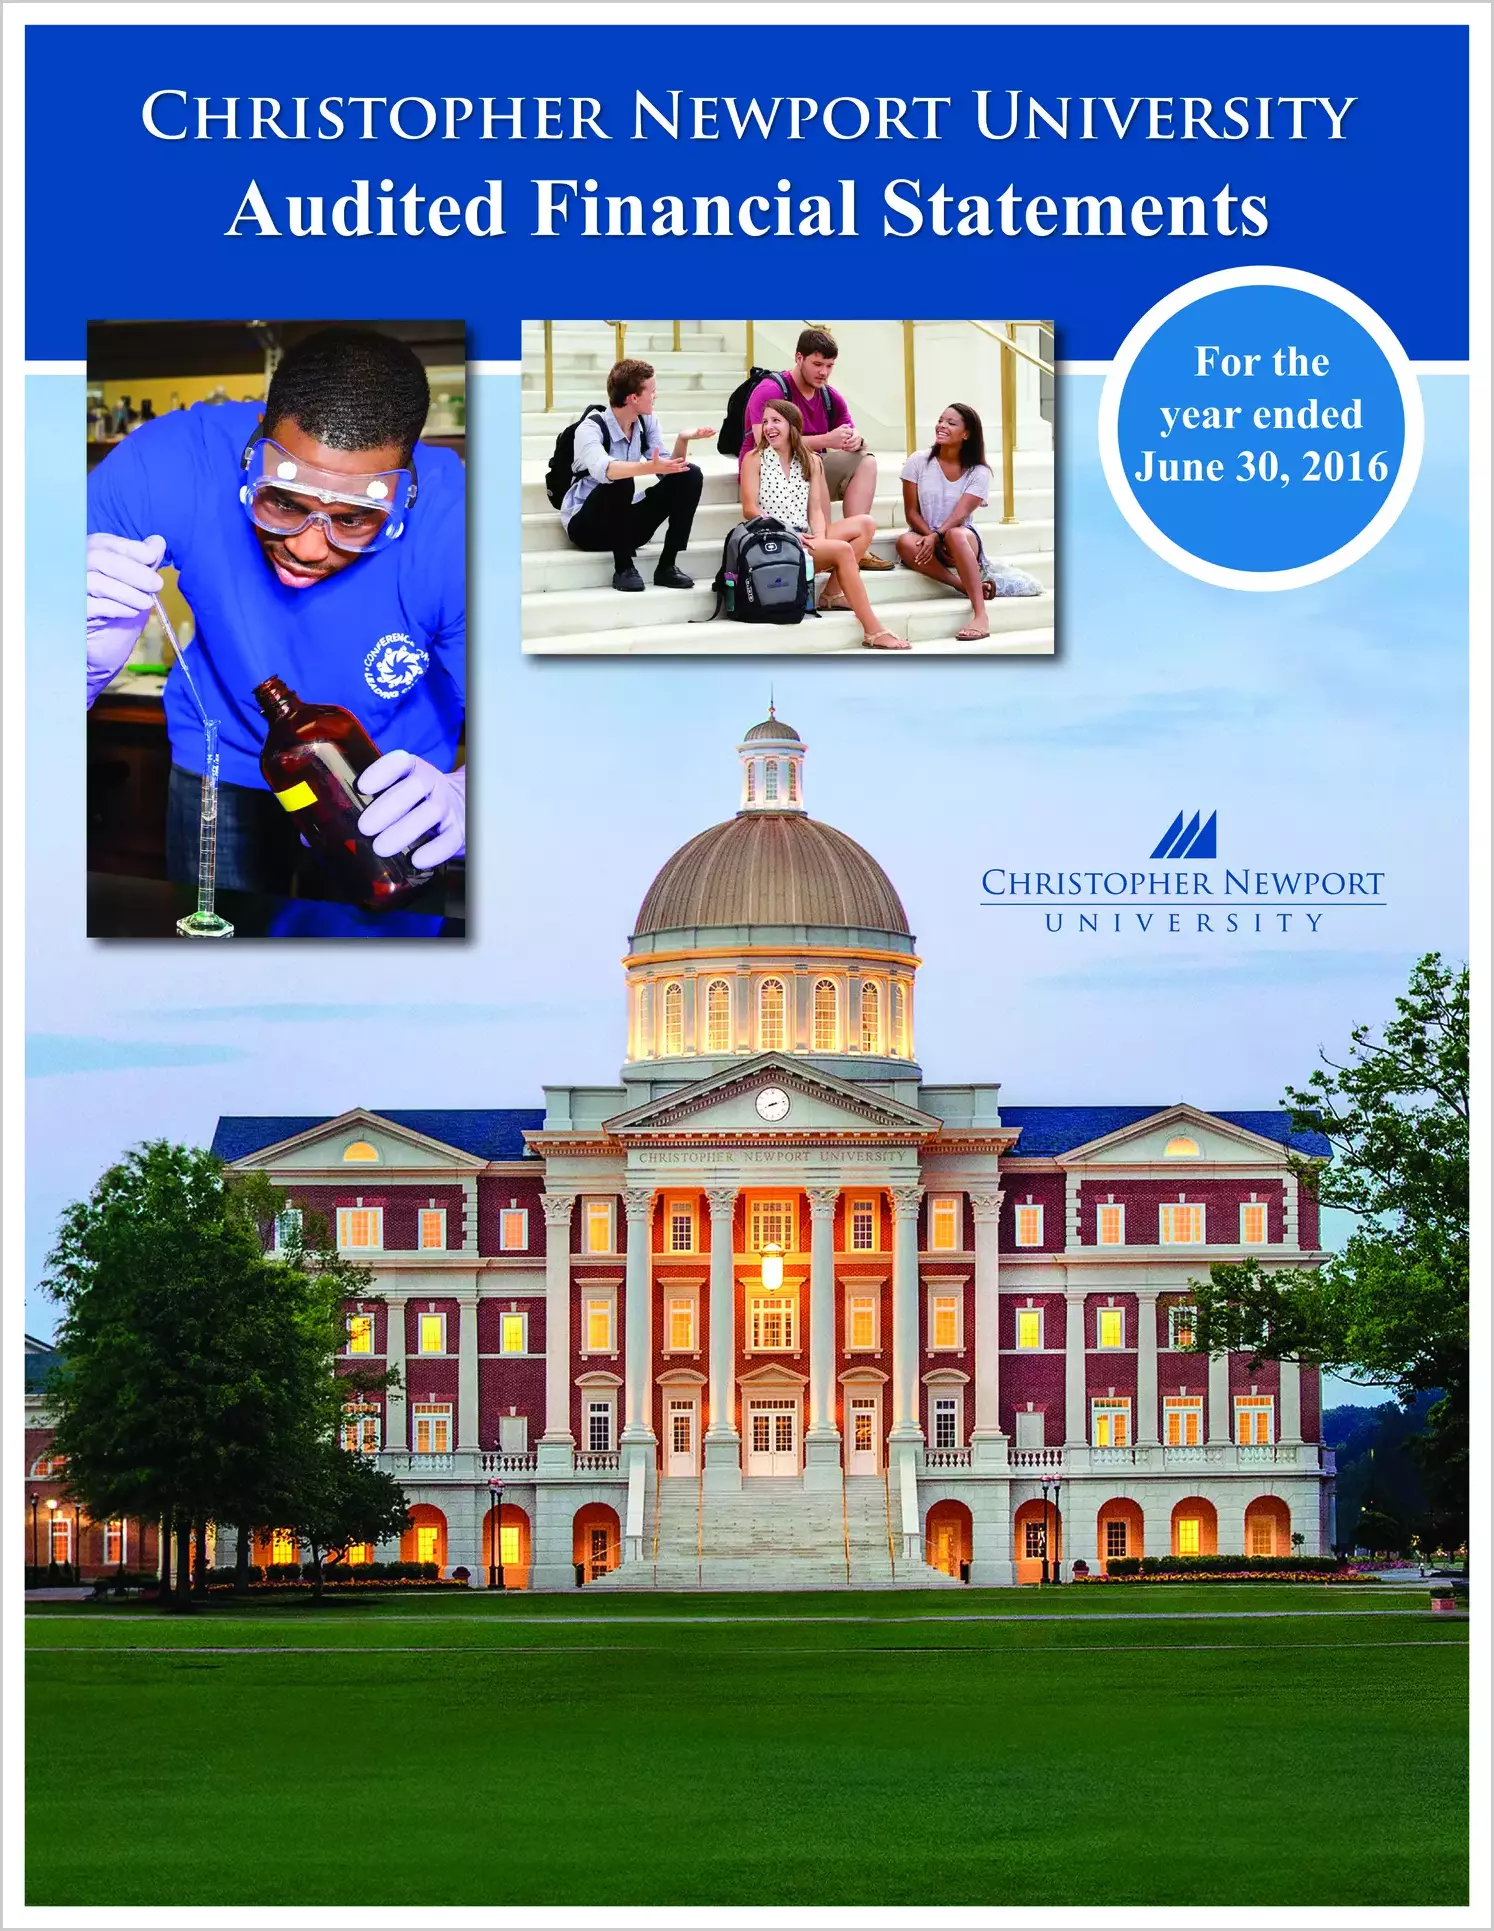 Christopher Newport University Financial Statements for the year ended June 30, 2016